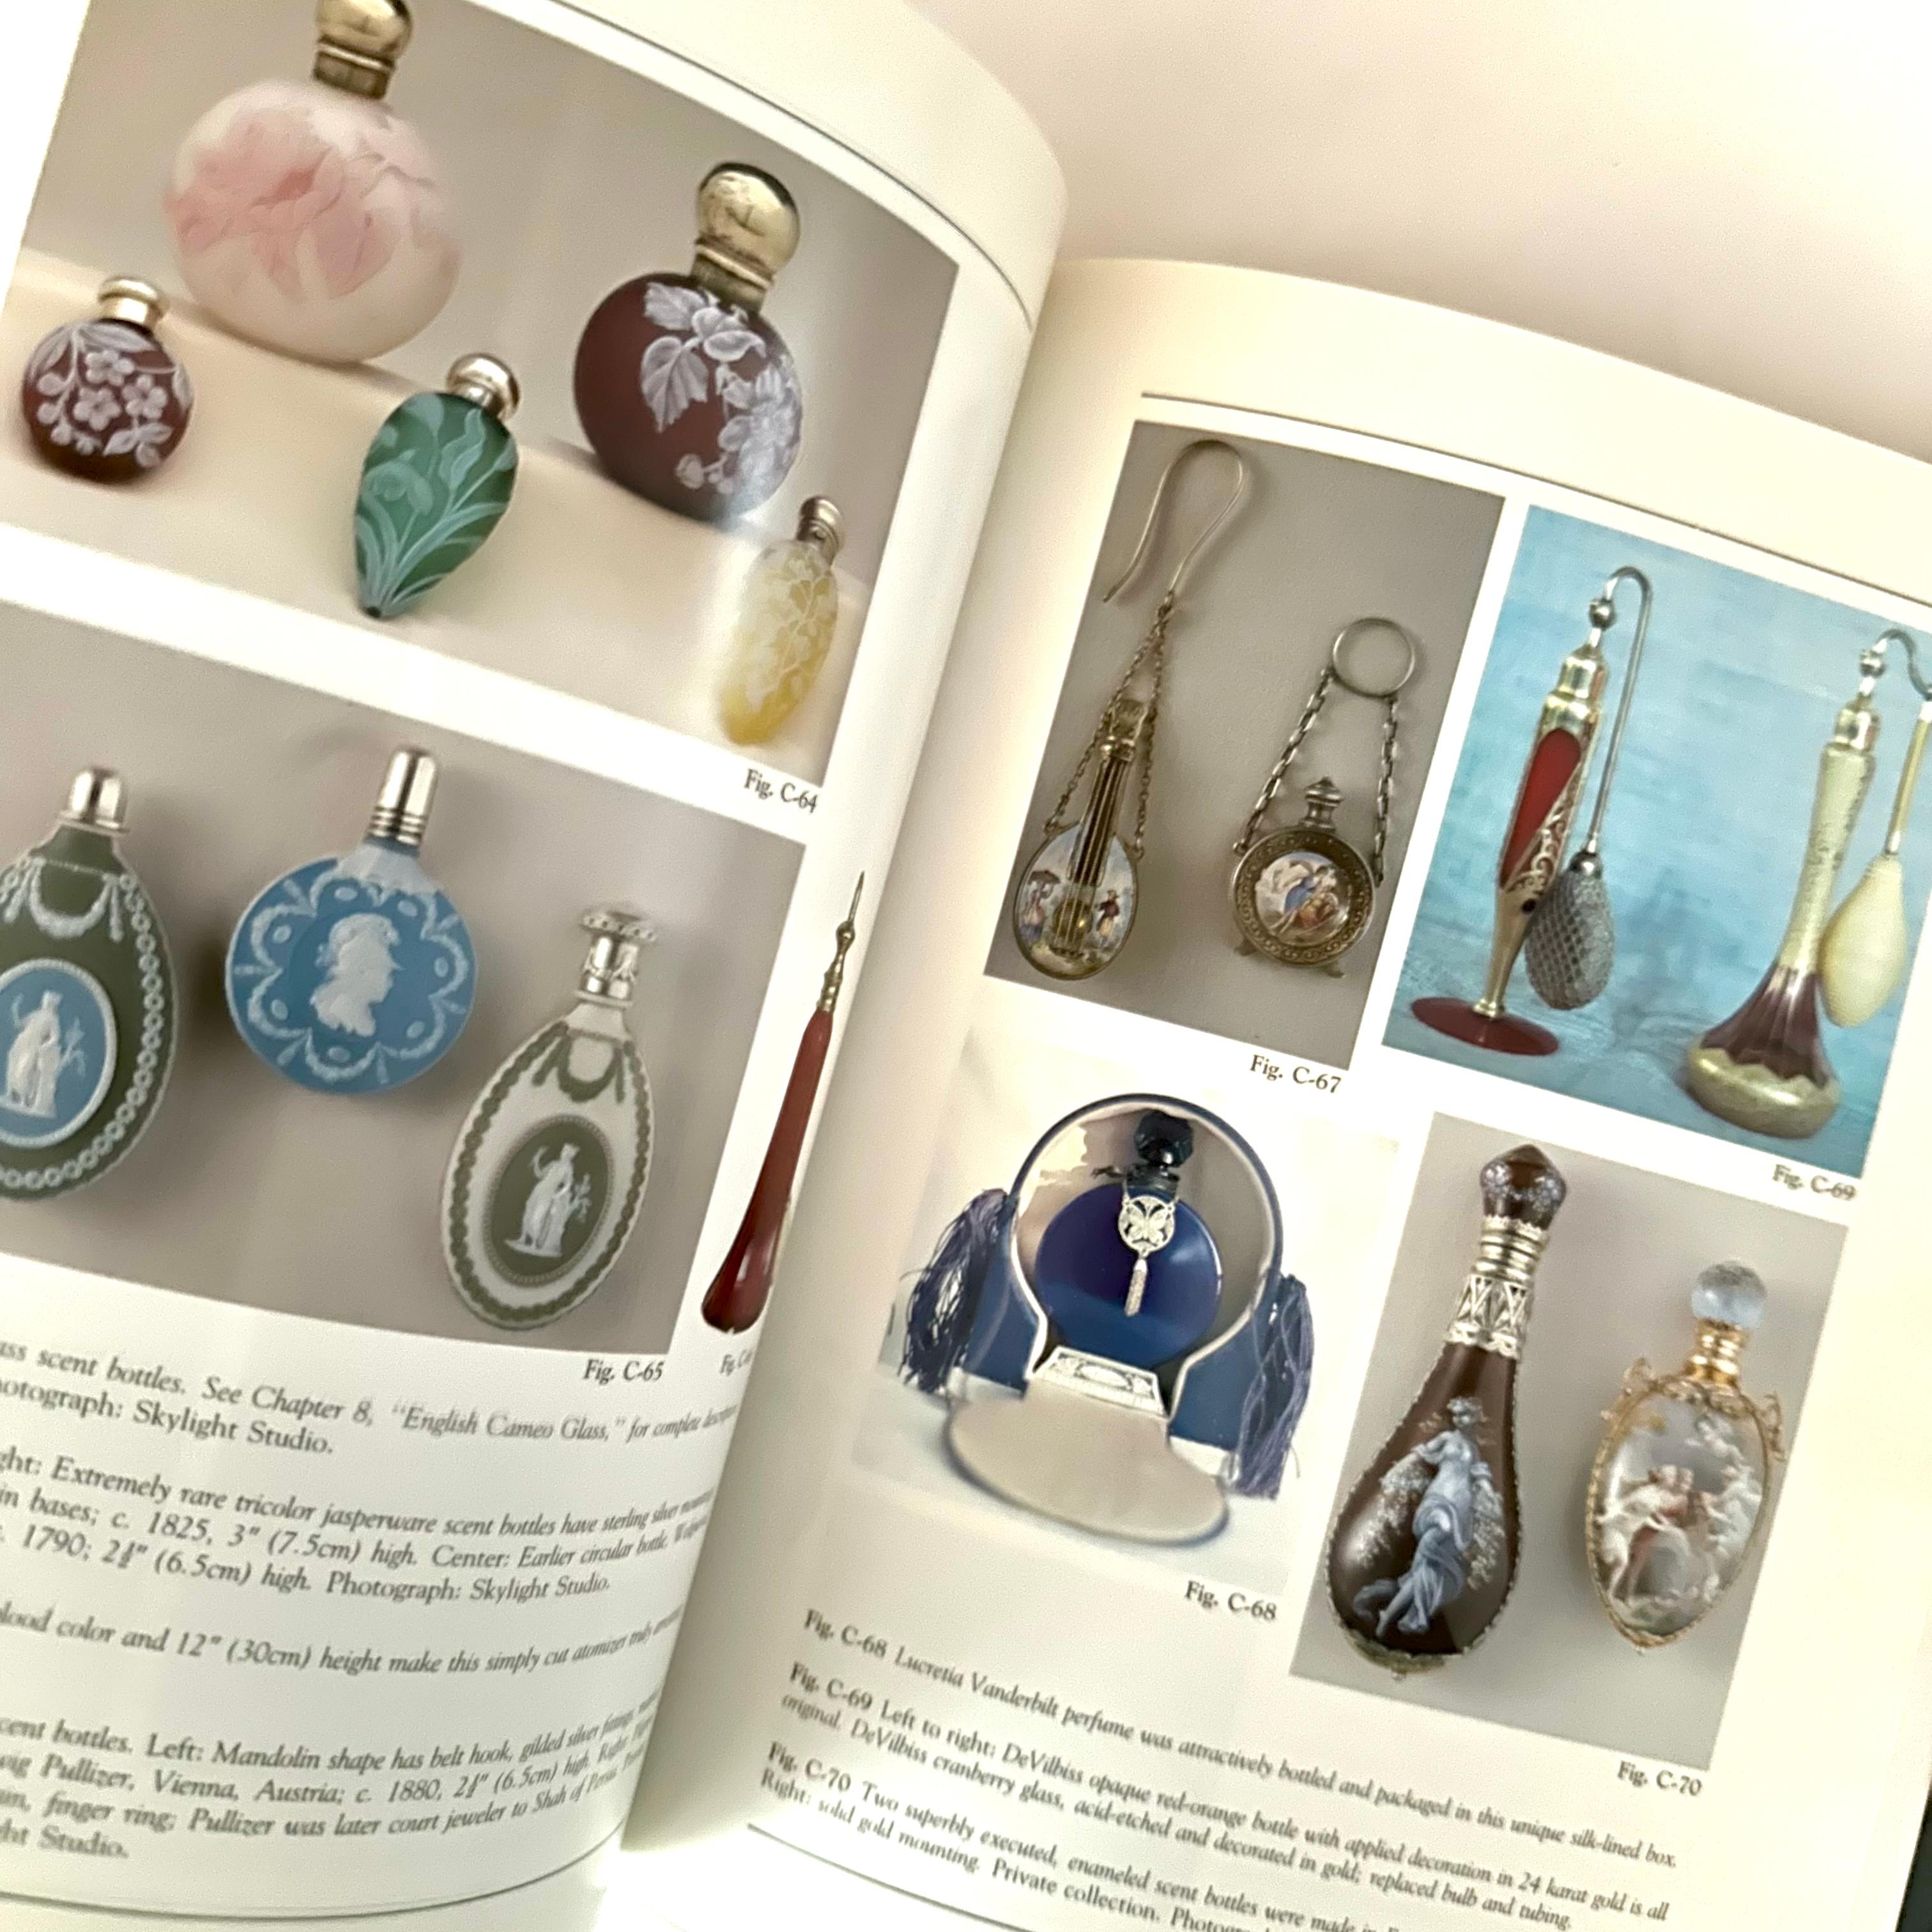 Paper Perfume & Scent Bottle Collecting with Prices - Jean Sloan - 1989 For Sale